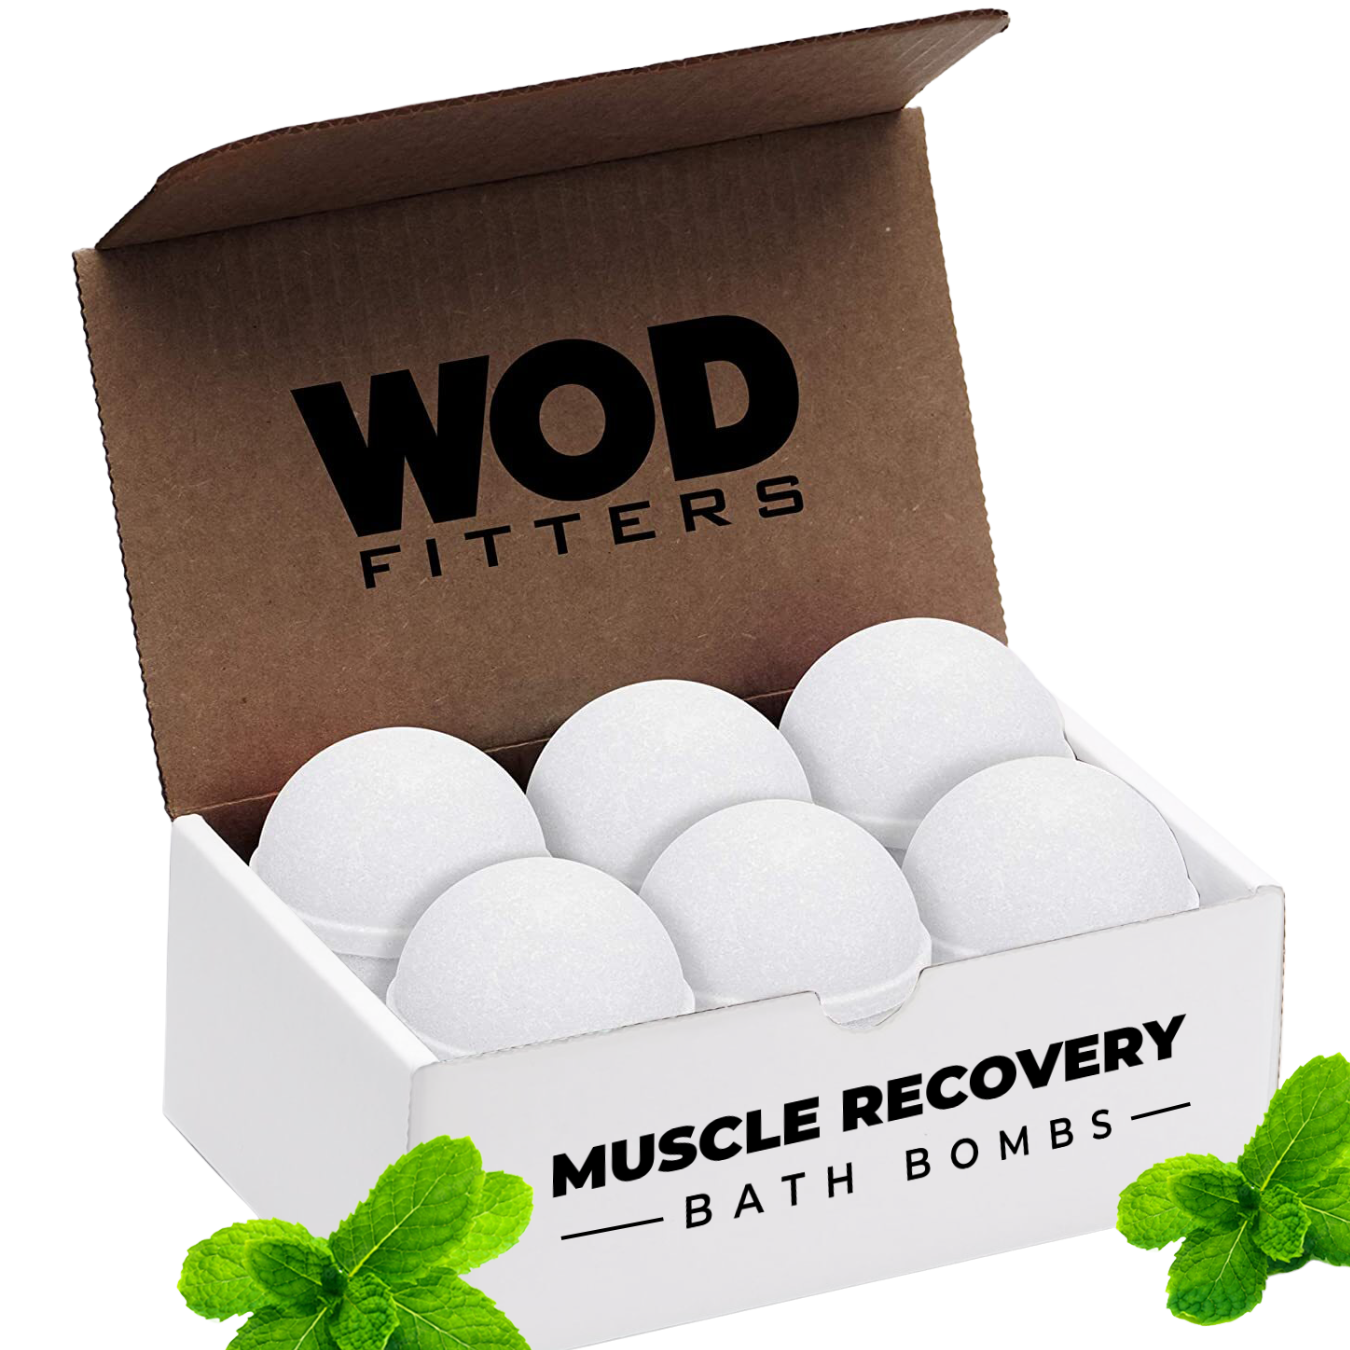 RecoverBomb! - Bath Bombs Scientifically Formulated for Fast Relief from Muscle Soreness After Tough Workouts - 6 Pack